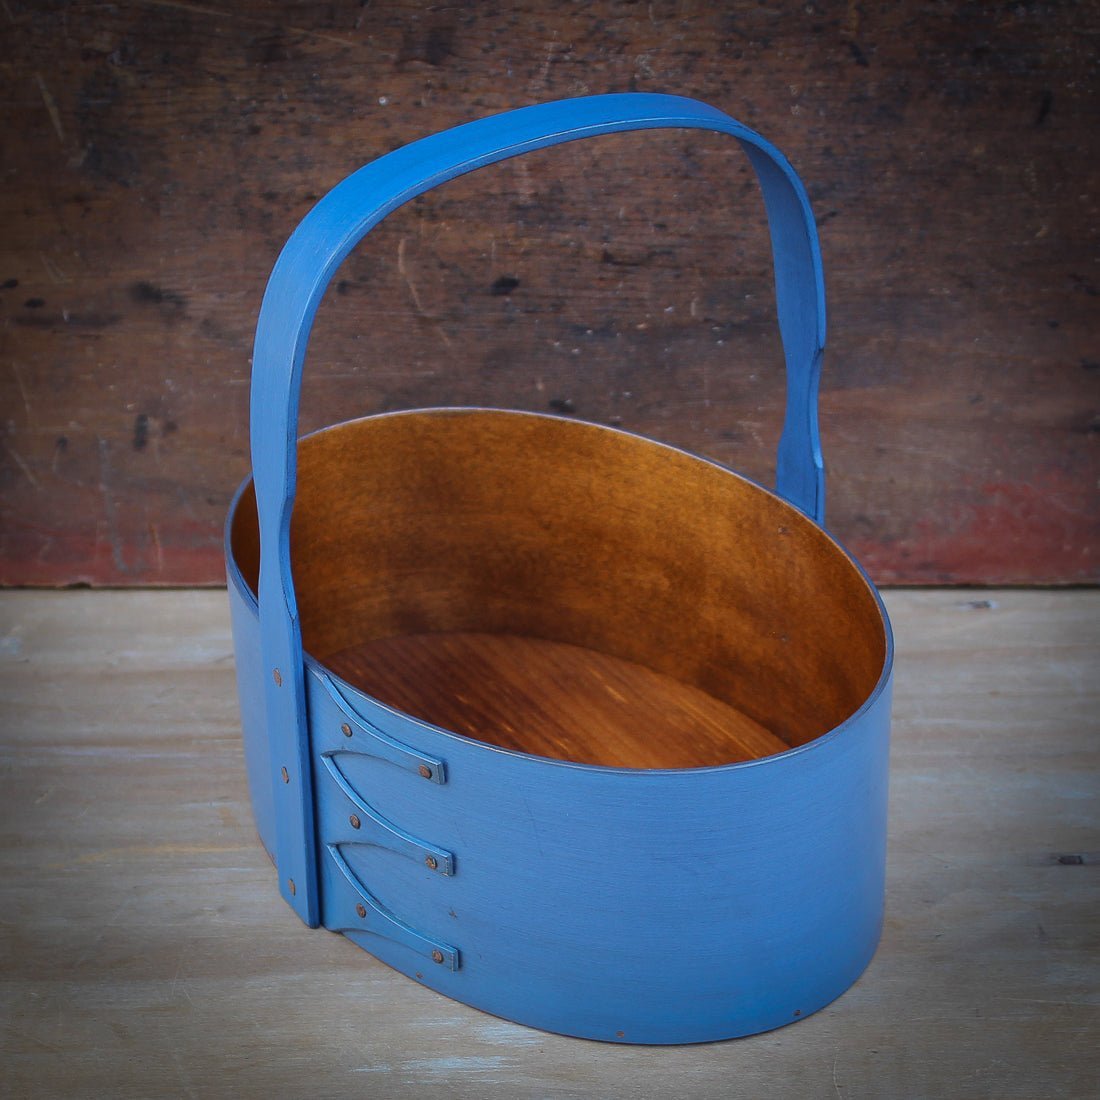 Shaker Carrier, Size #5, LeHays Shaker Boxes, Handcrafted in Maine, Blue Milk Paint Finish, Side View